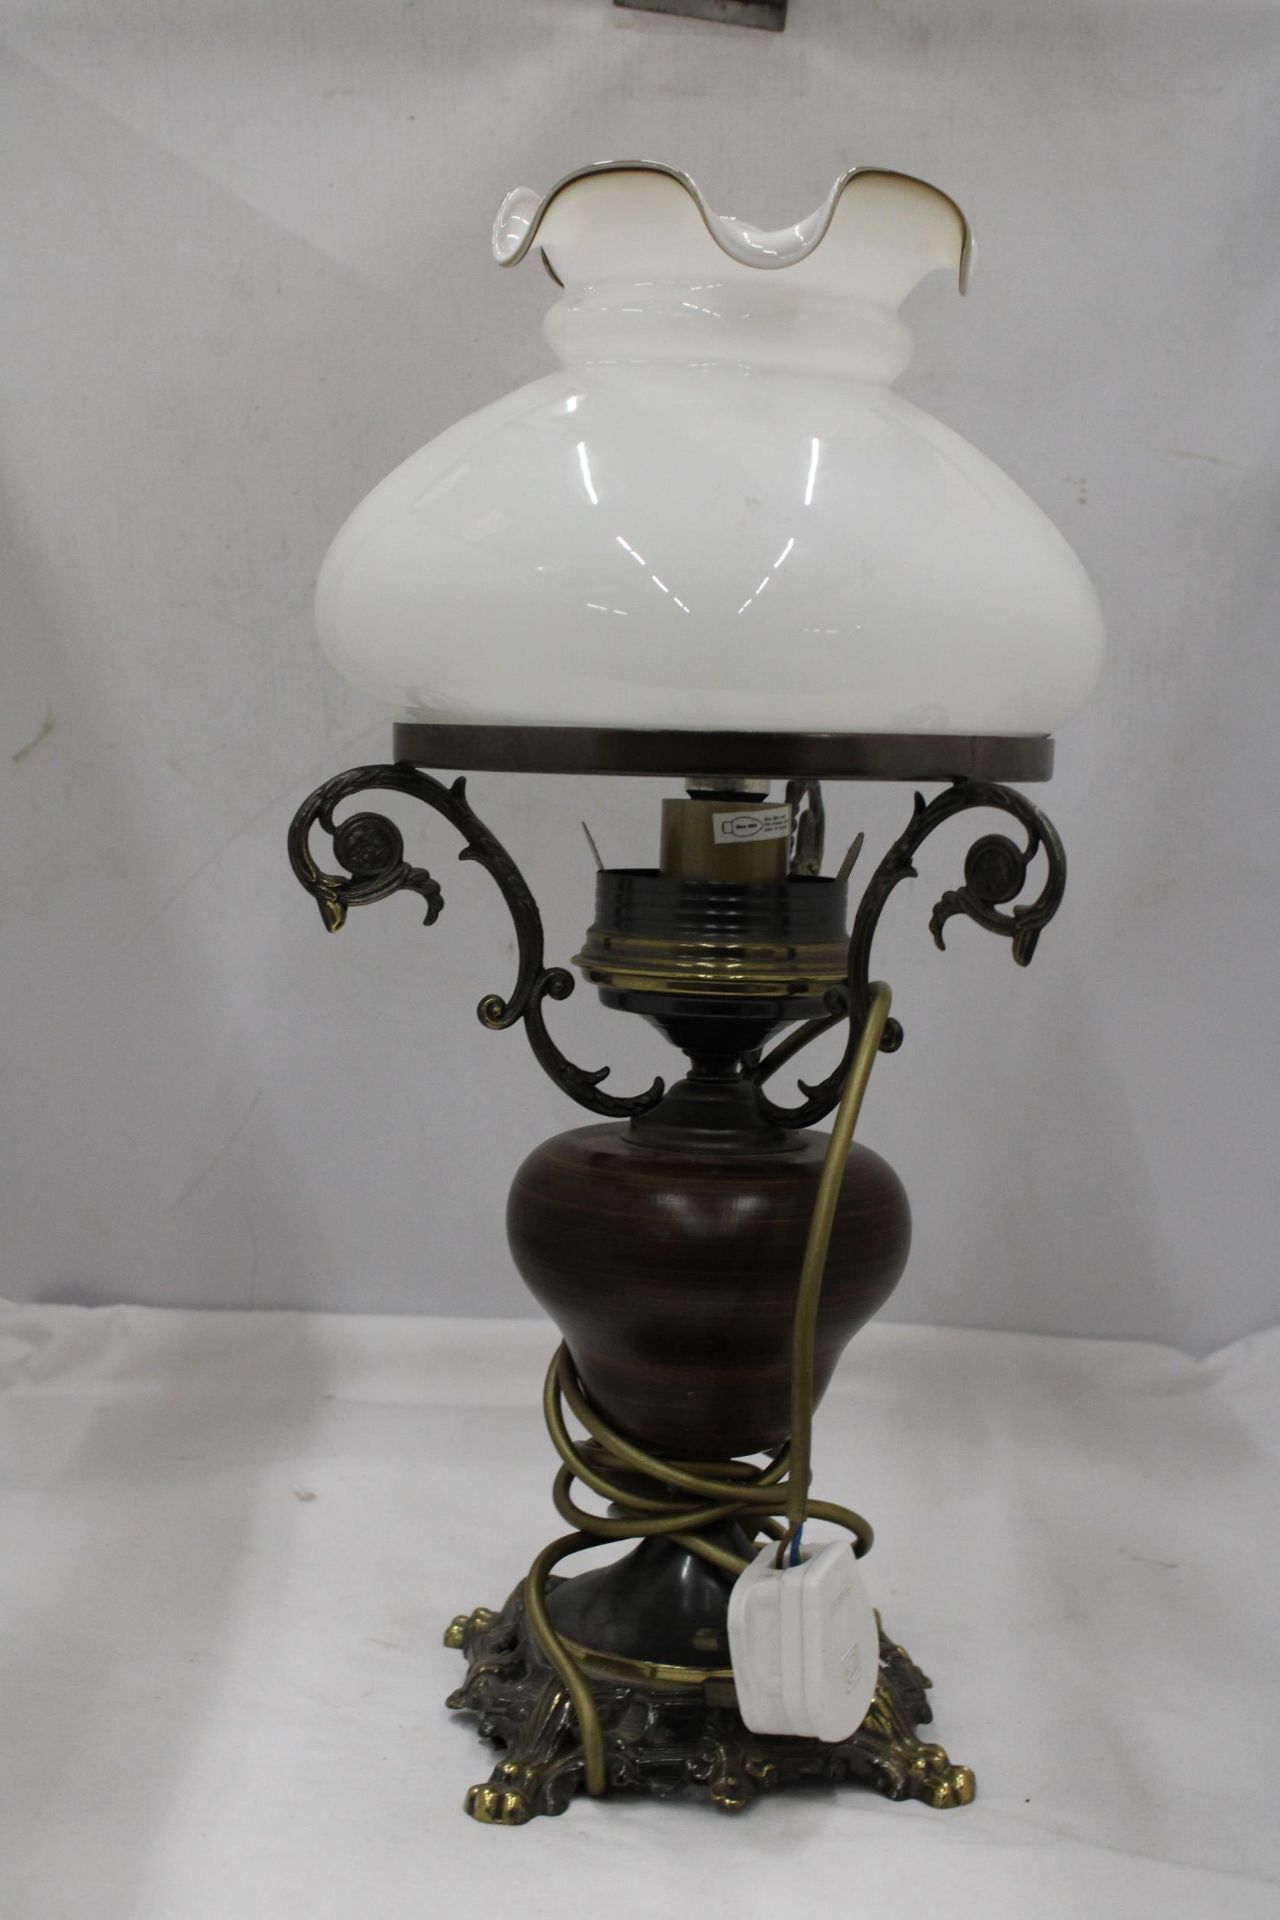 A VINTAGE STYLE TABLE LAMP IN THE STYLE OF AN OIL LAMP, WITH FLUTED GLASS SHADE, WOODEN MIDDLE AND - Image 2 of 4